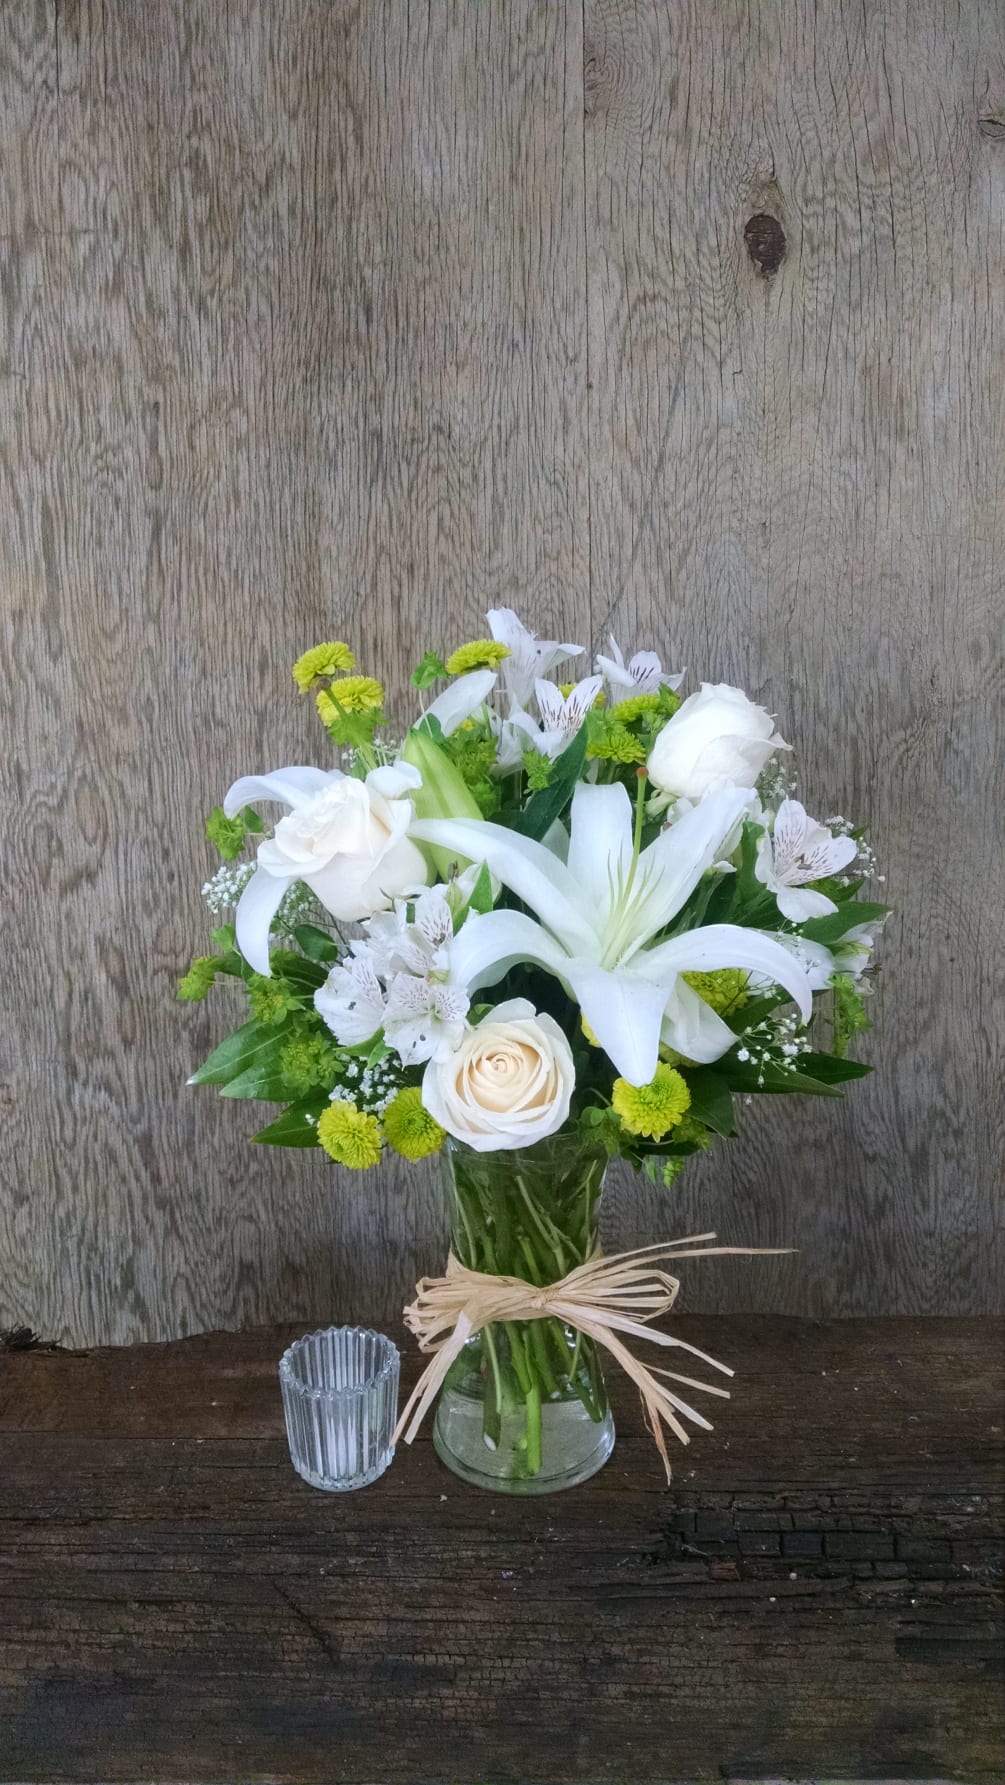 White Lilies and roses a green buttons makes this a versatile arrangement